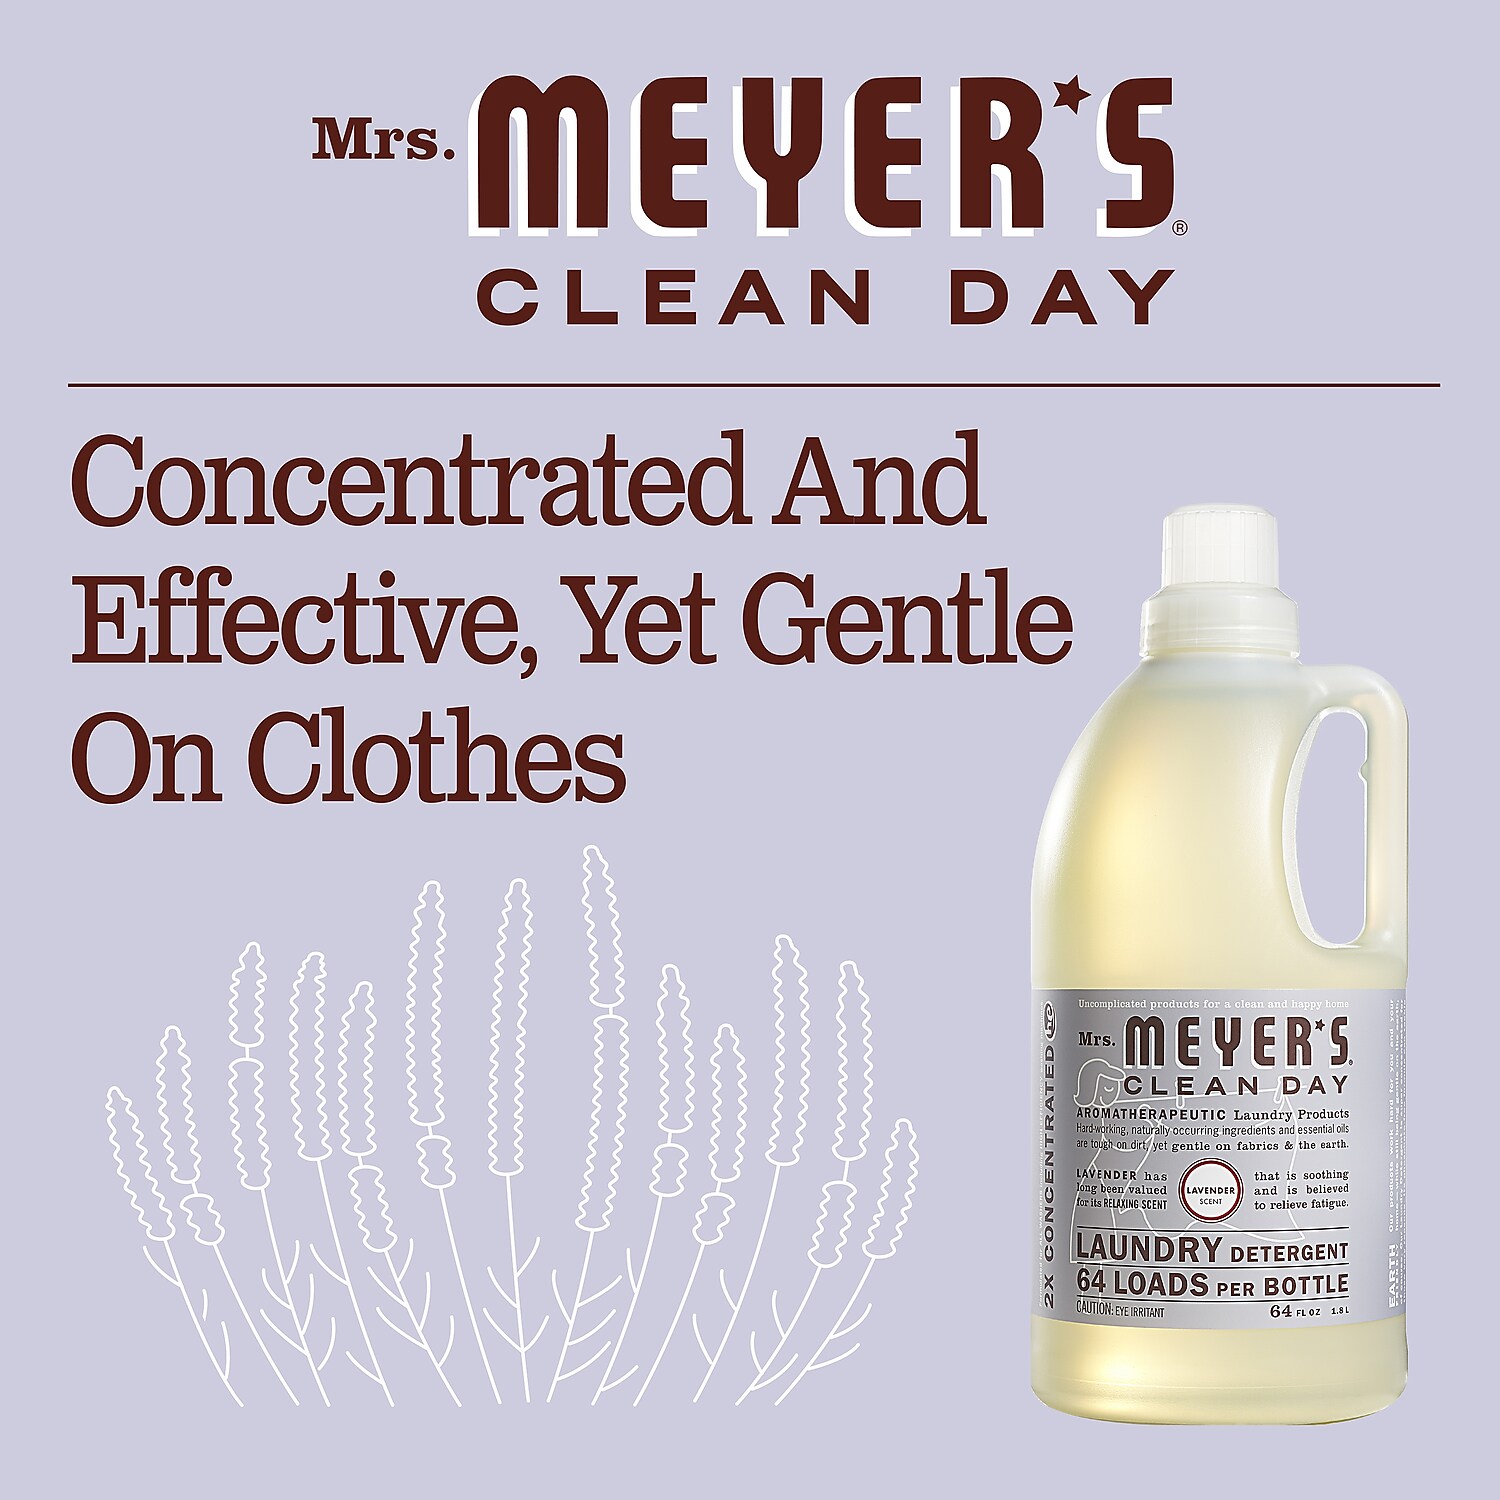 Mrs. Meyers Clean Day Laundry Detergent, Lavender, 64 fl oz - image 5 of 7